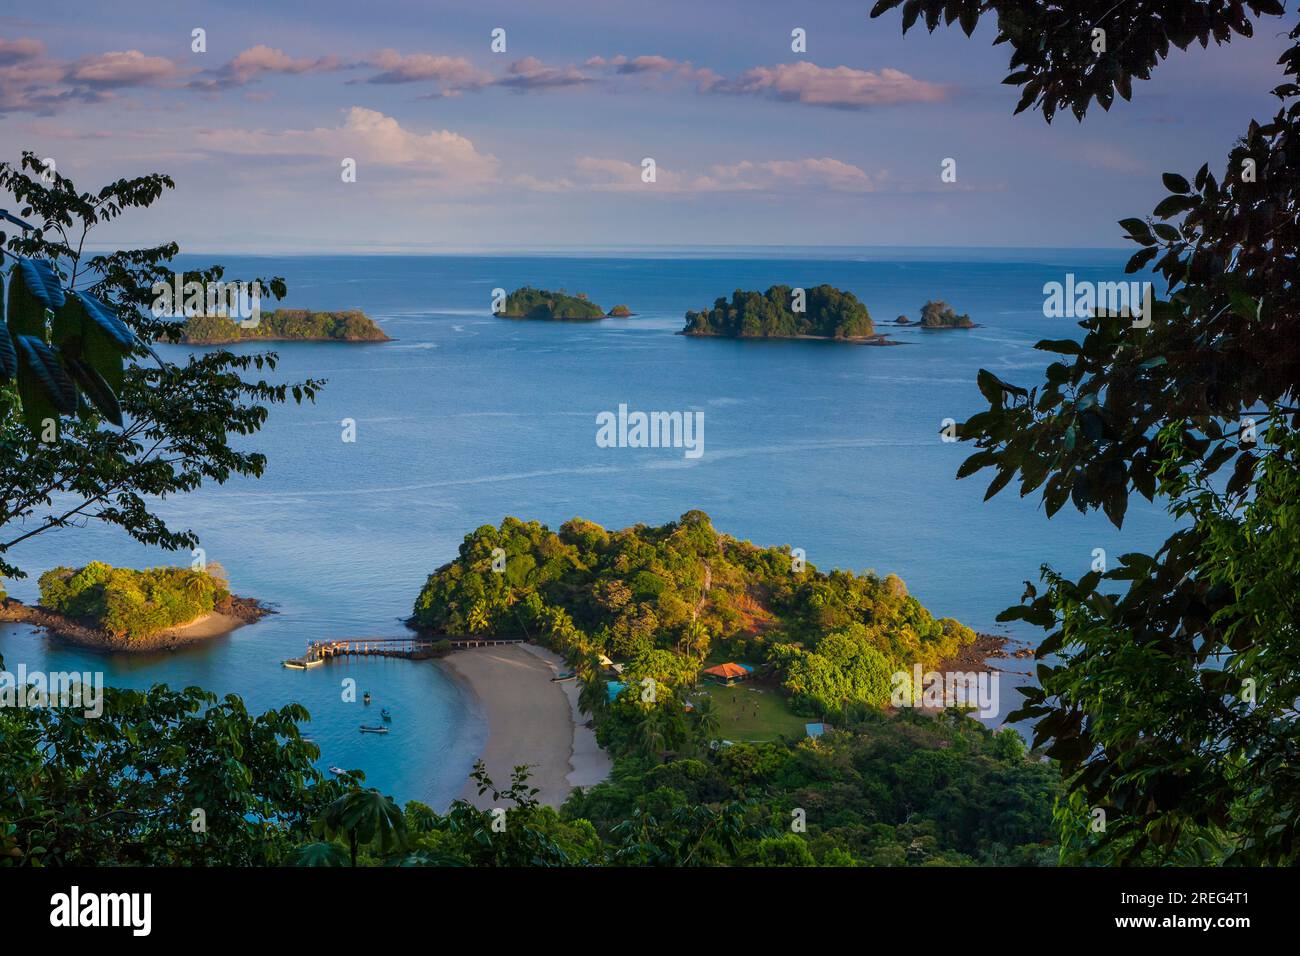 Last evening light at the northeastern side of Coiba Island, Pacific coast, Veraguas province, Republic of Panama, Central America. Stock Photo